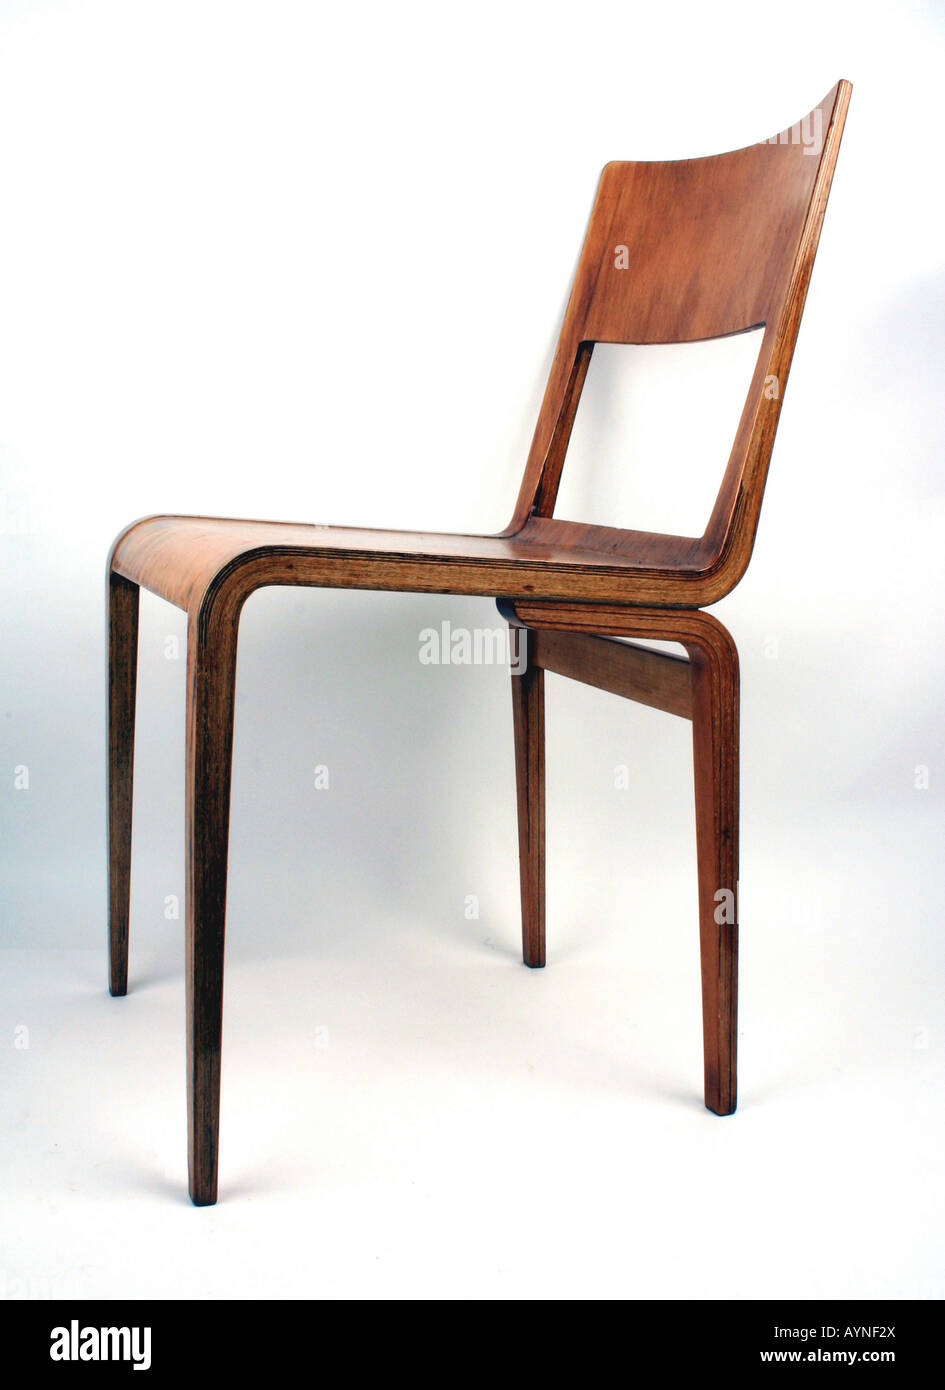 Furnishing Furniture Chairs Veneer Chair 50642 Produced By Veb